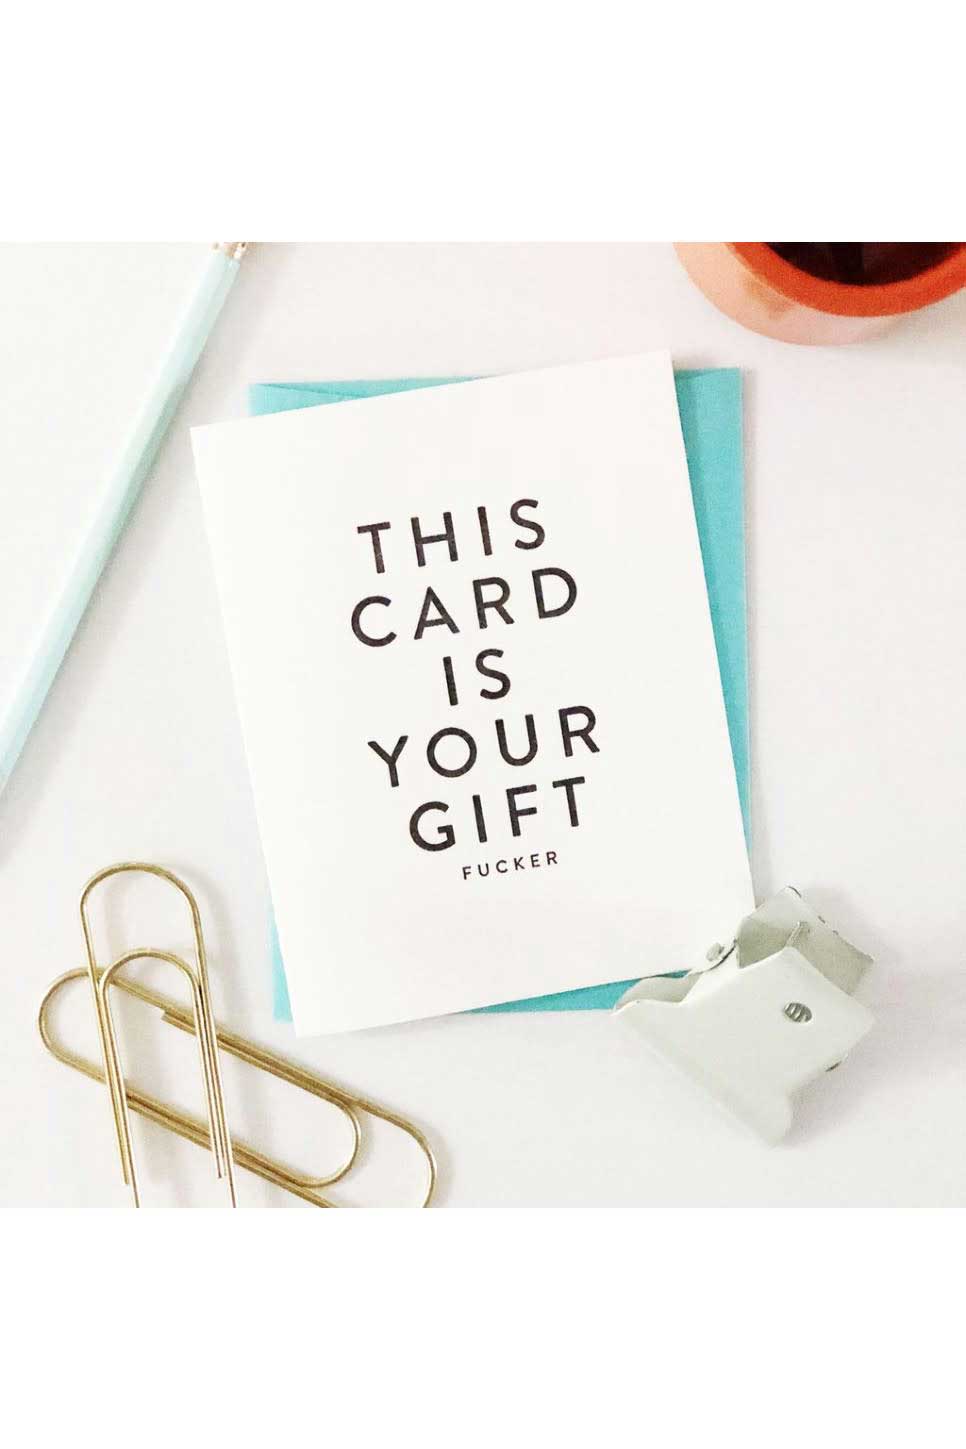 YOUR GIFT CARD